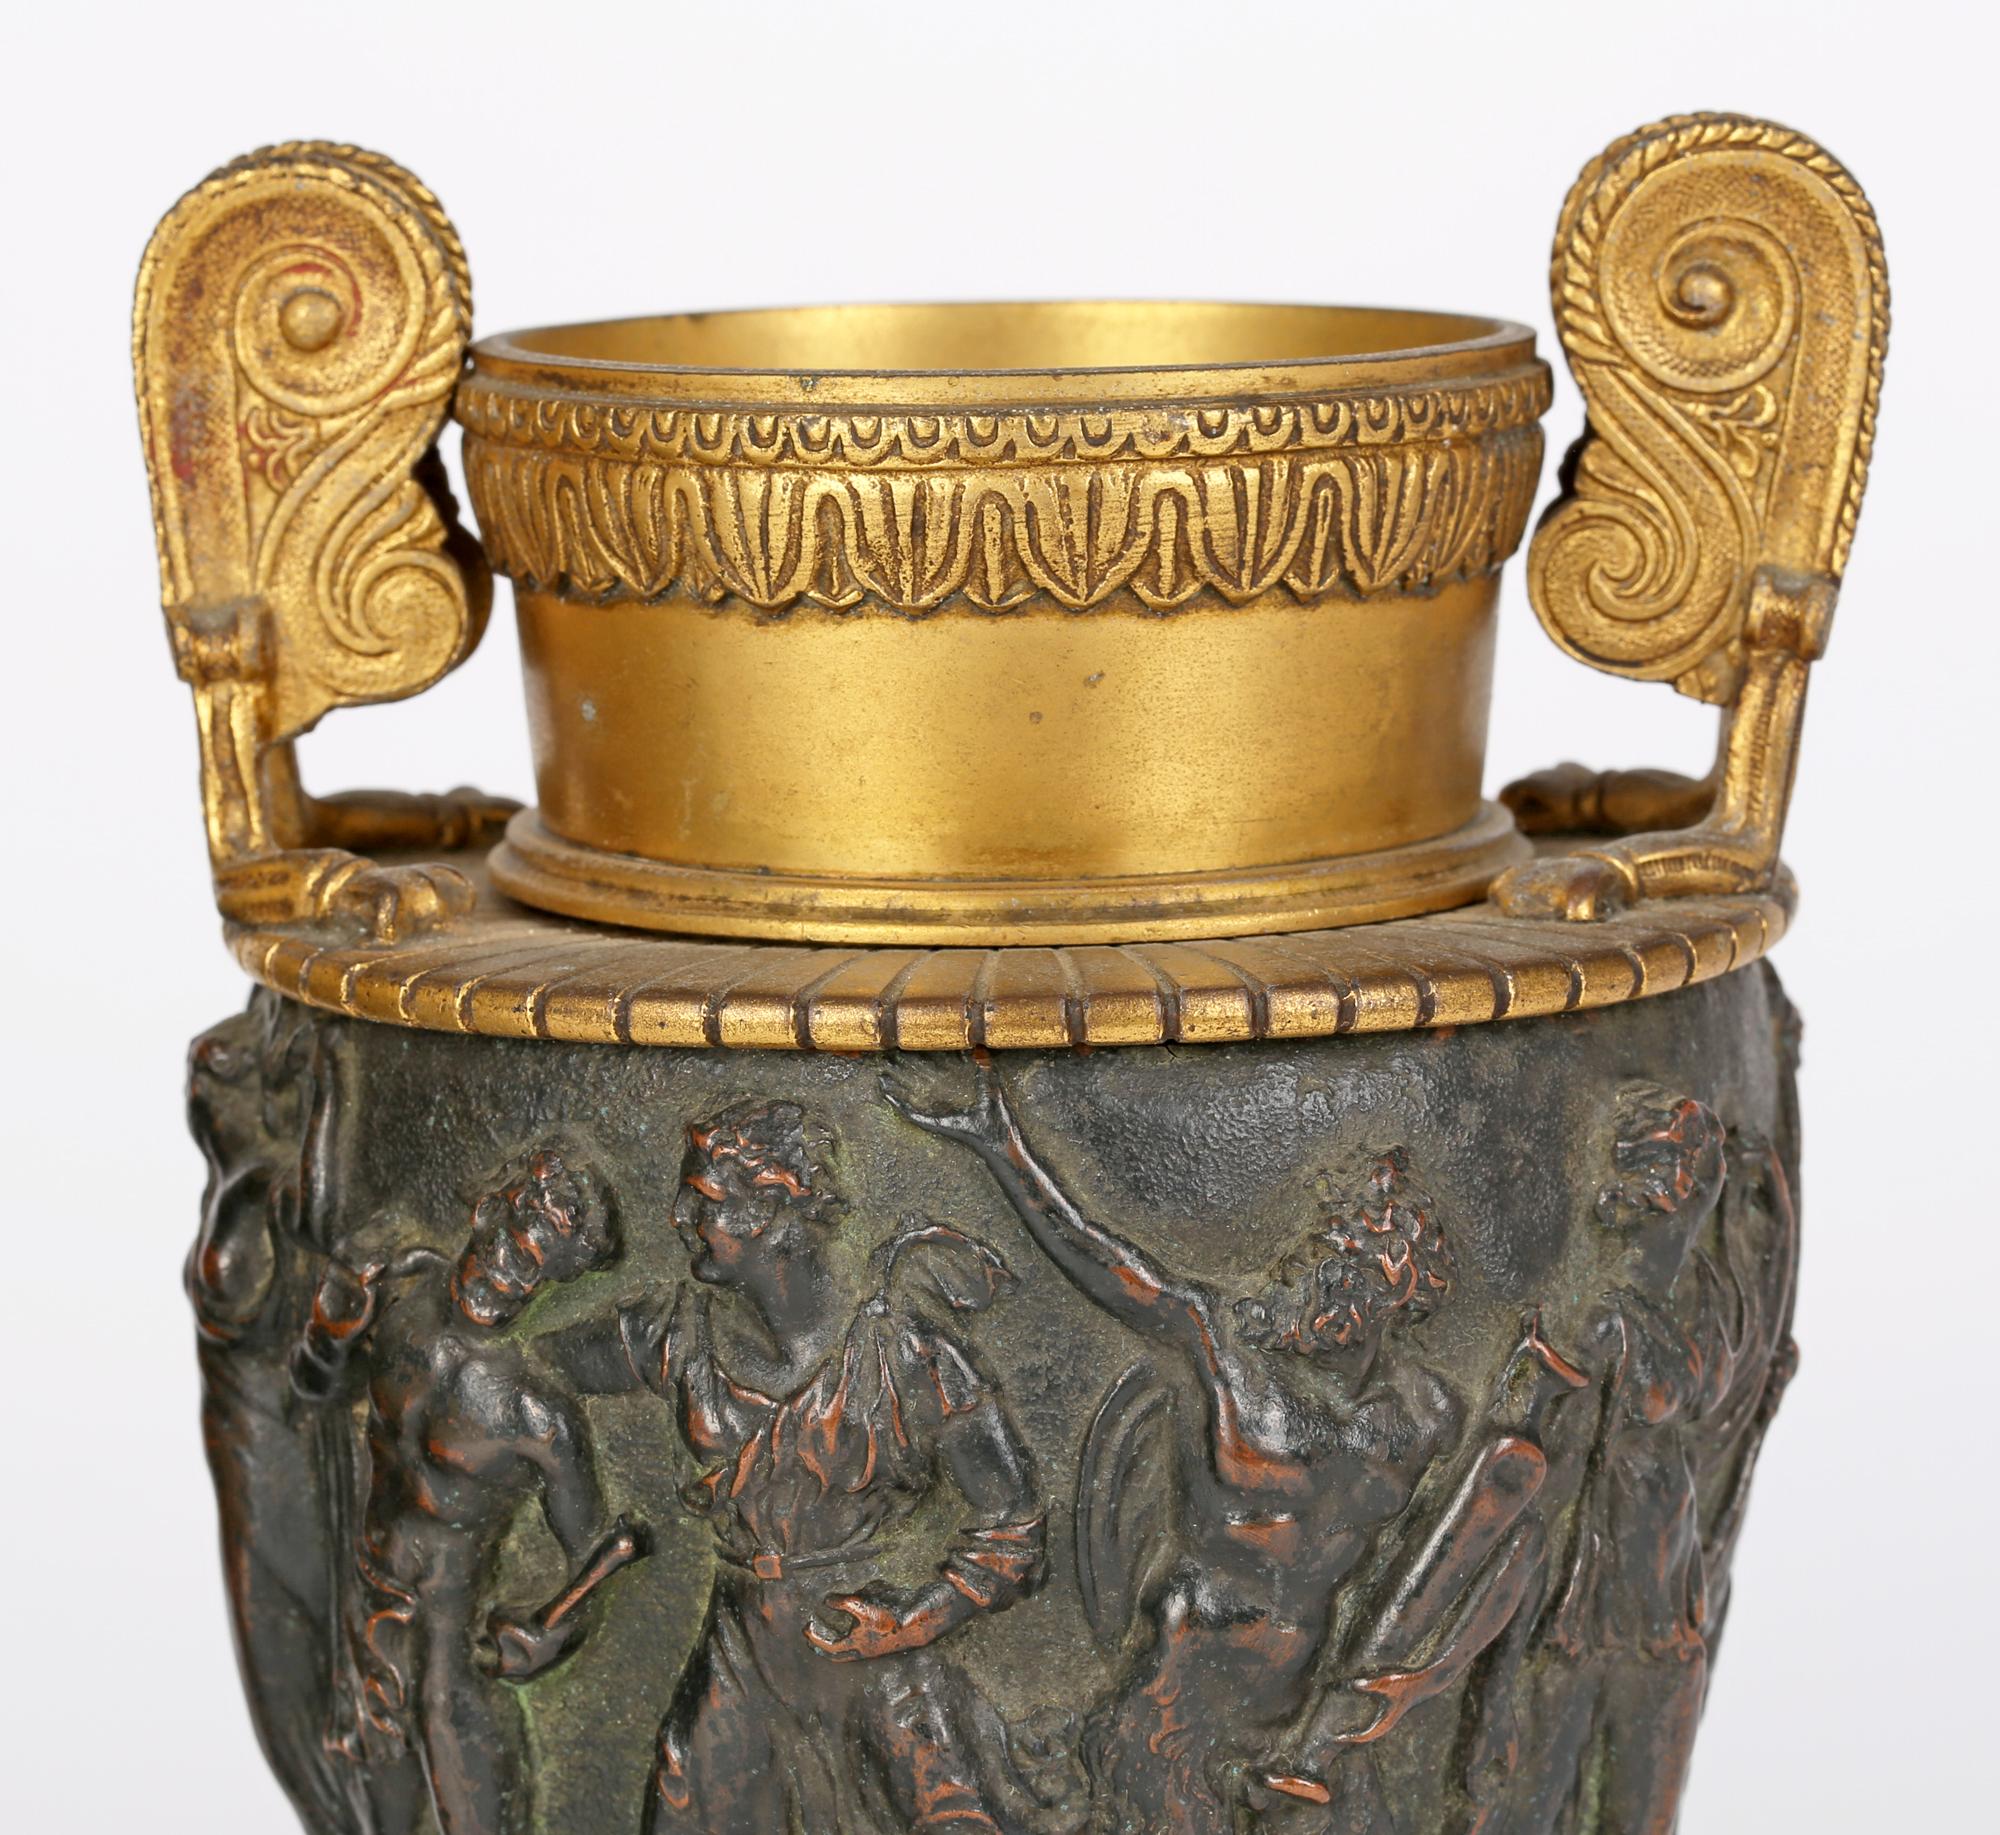 A stunning pair antique Italian Neo-Classical gilt mounted bronze handled urns with classical figural friezes probably made for the grand tour and dating from the mid-19th century. These stylish urns stand on a rounded gilded stepped foot with a